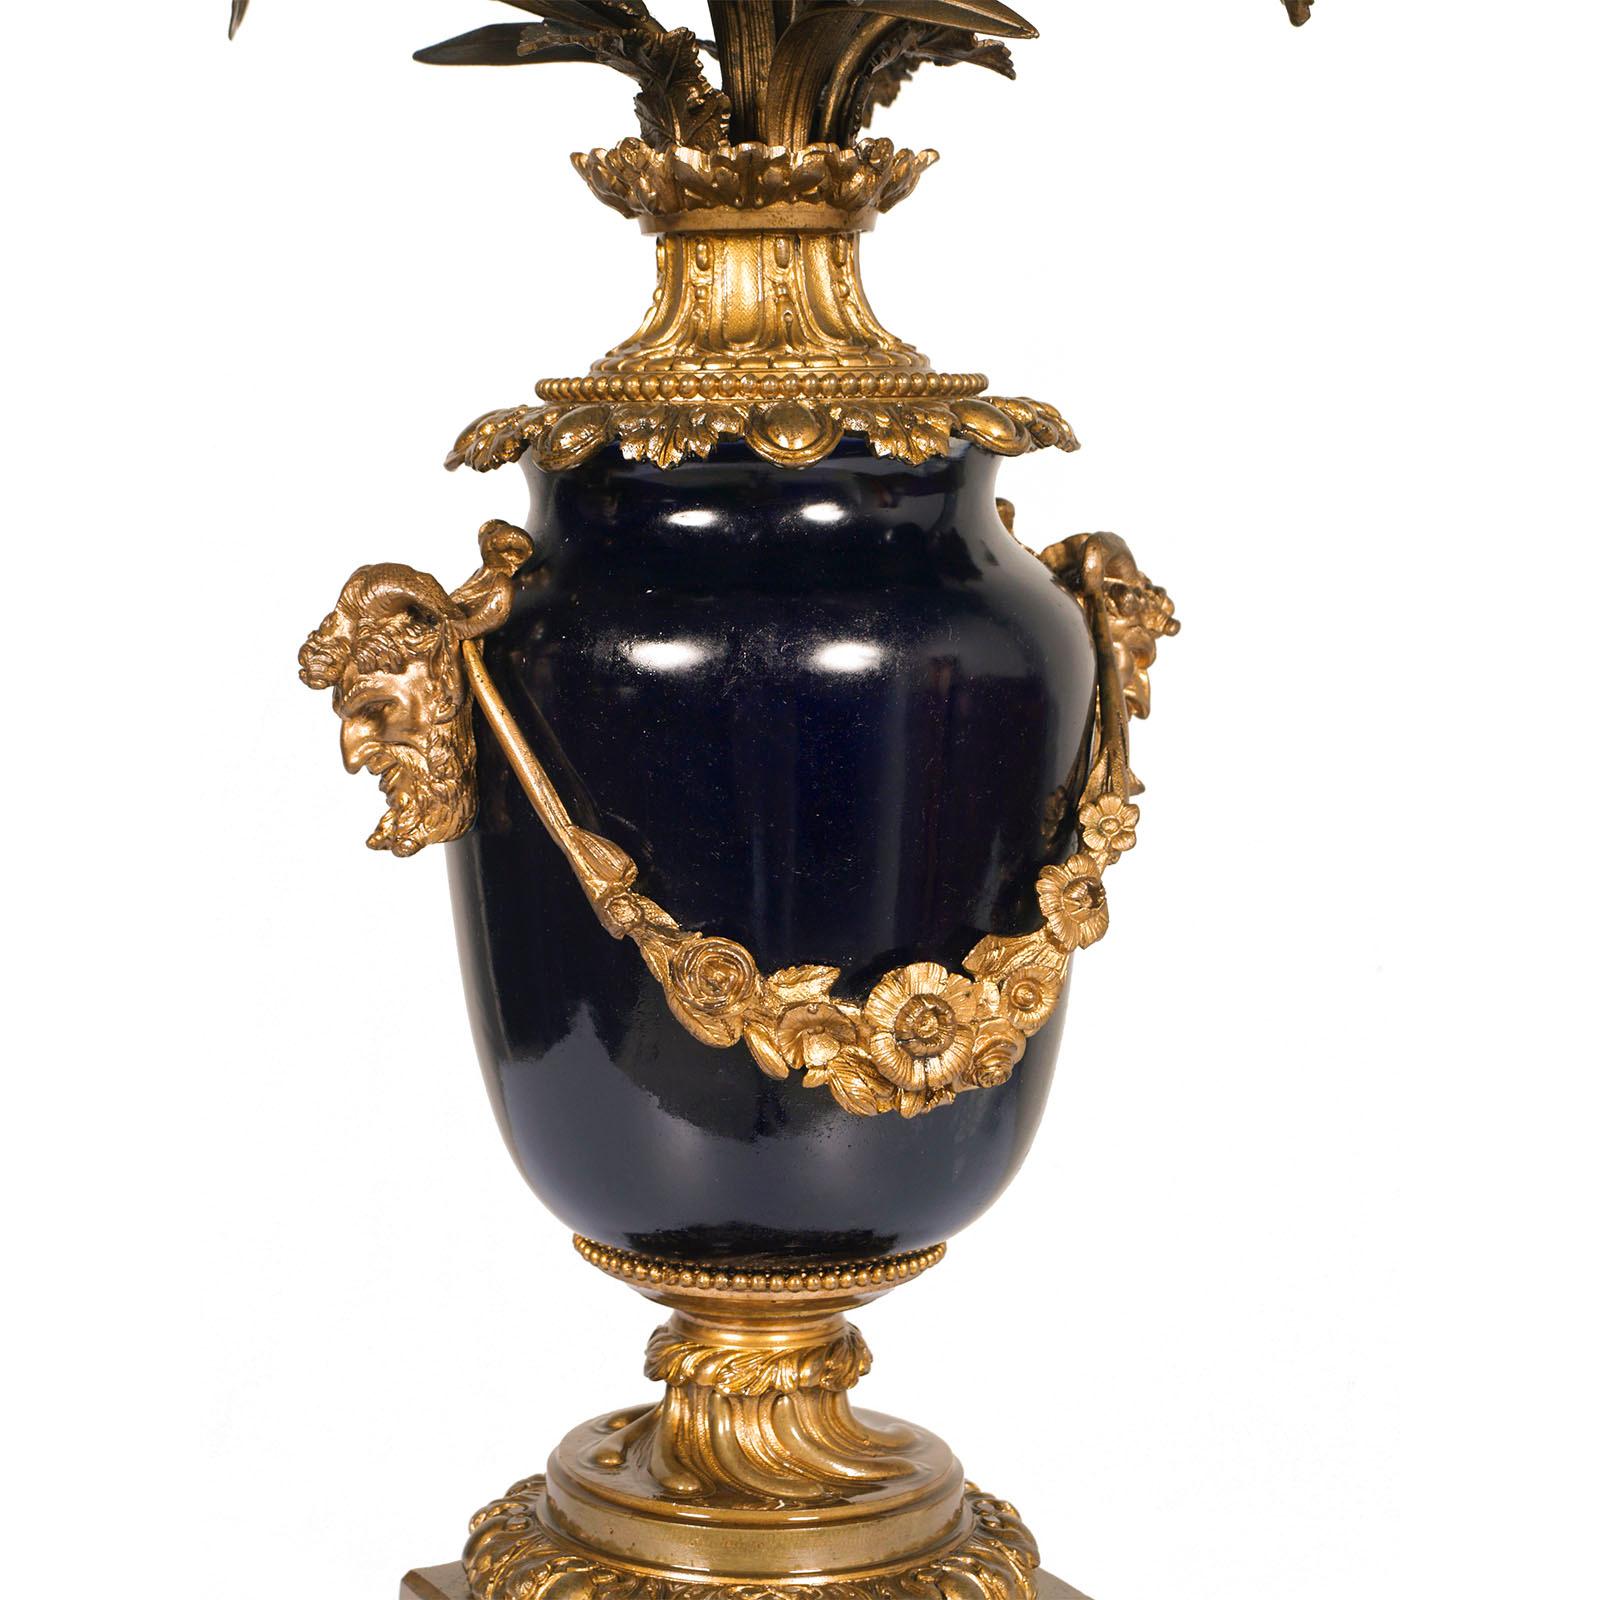 Early XIX Century French candlestick , Sèvres blue cobalt porcelain, gilt bronze  centerpiece
Candle holders immersed in a bouquet of flowers. Bronze structure richly decorated with classical motifs, with two heads of Zeus with ram horns.